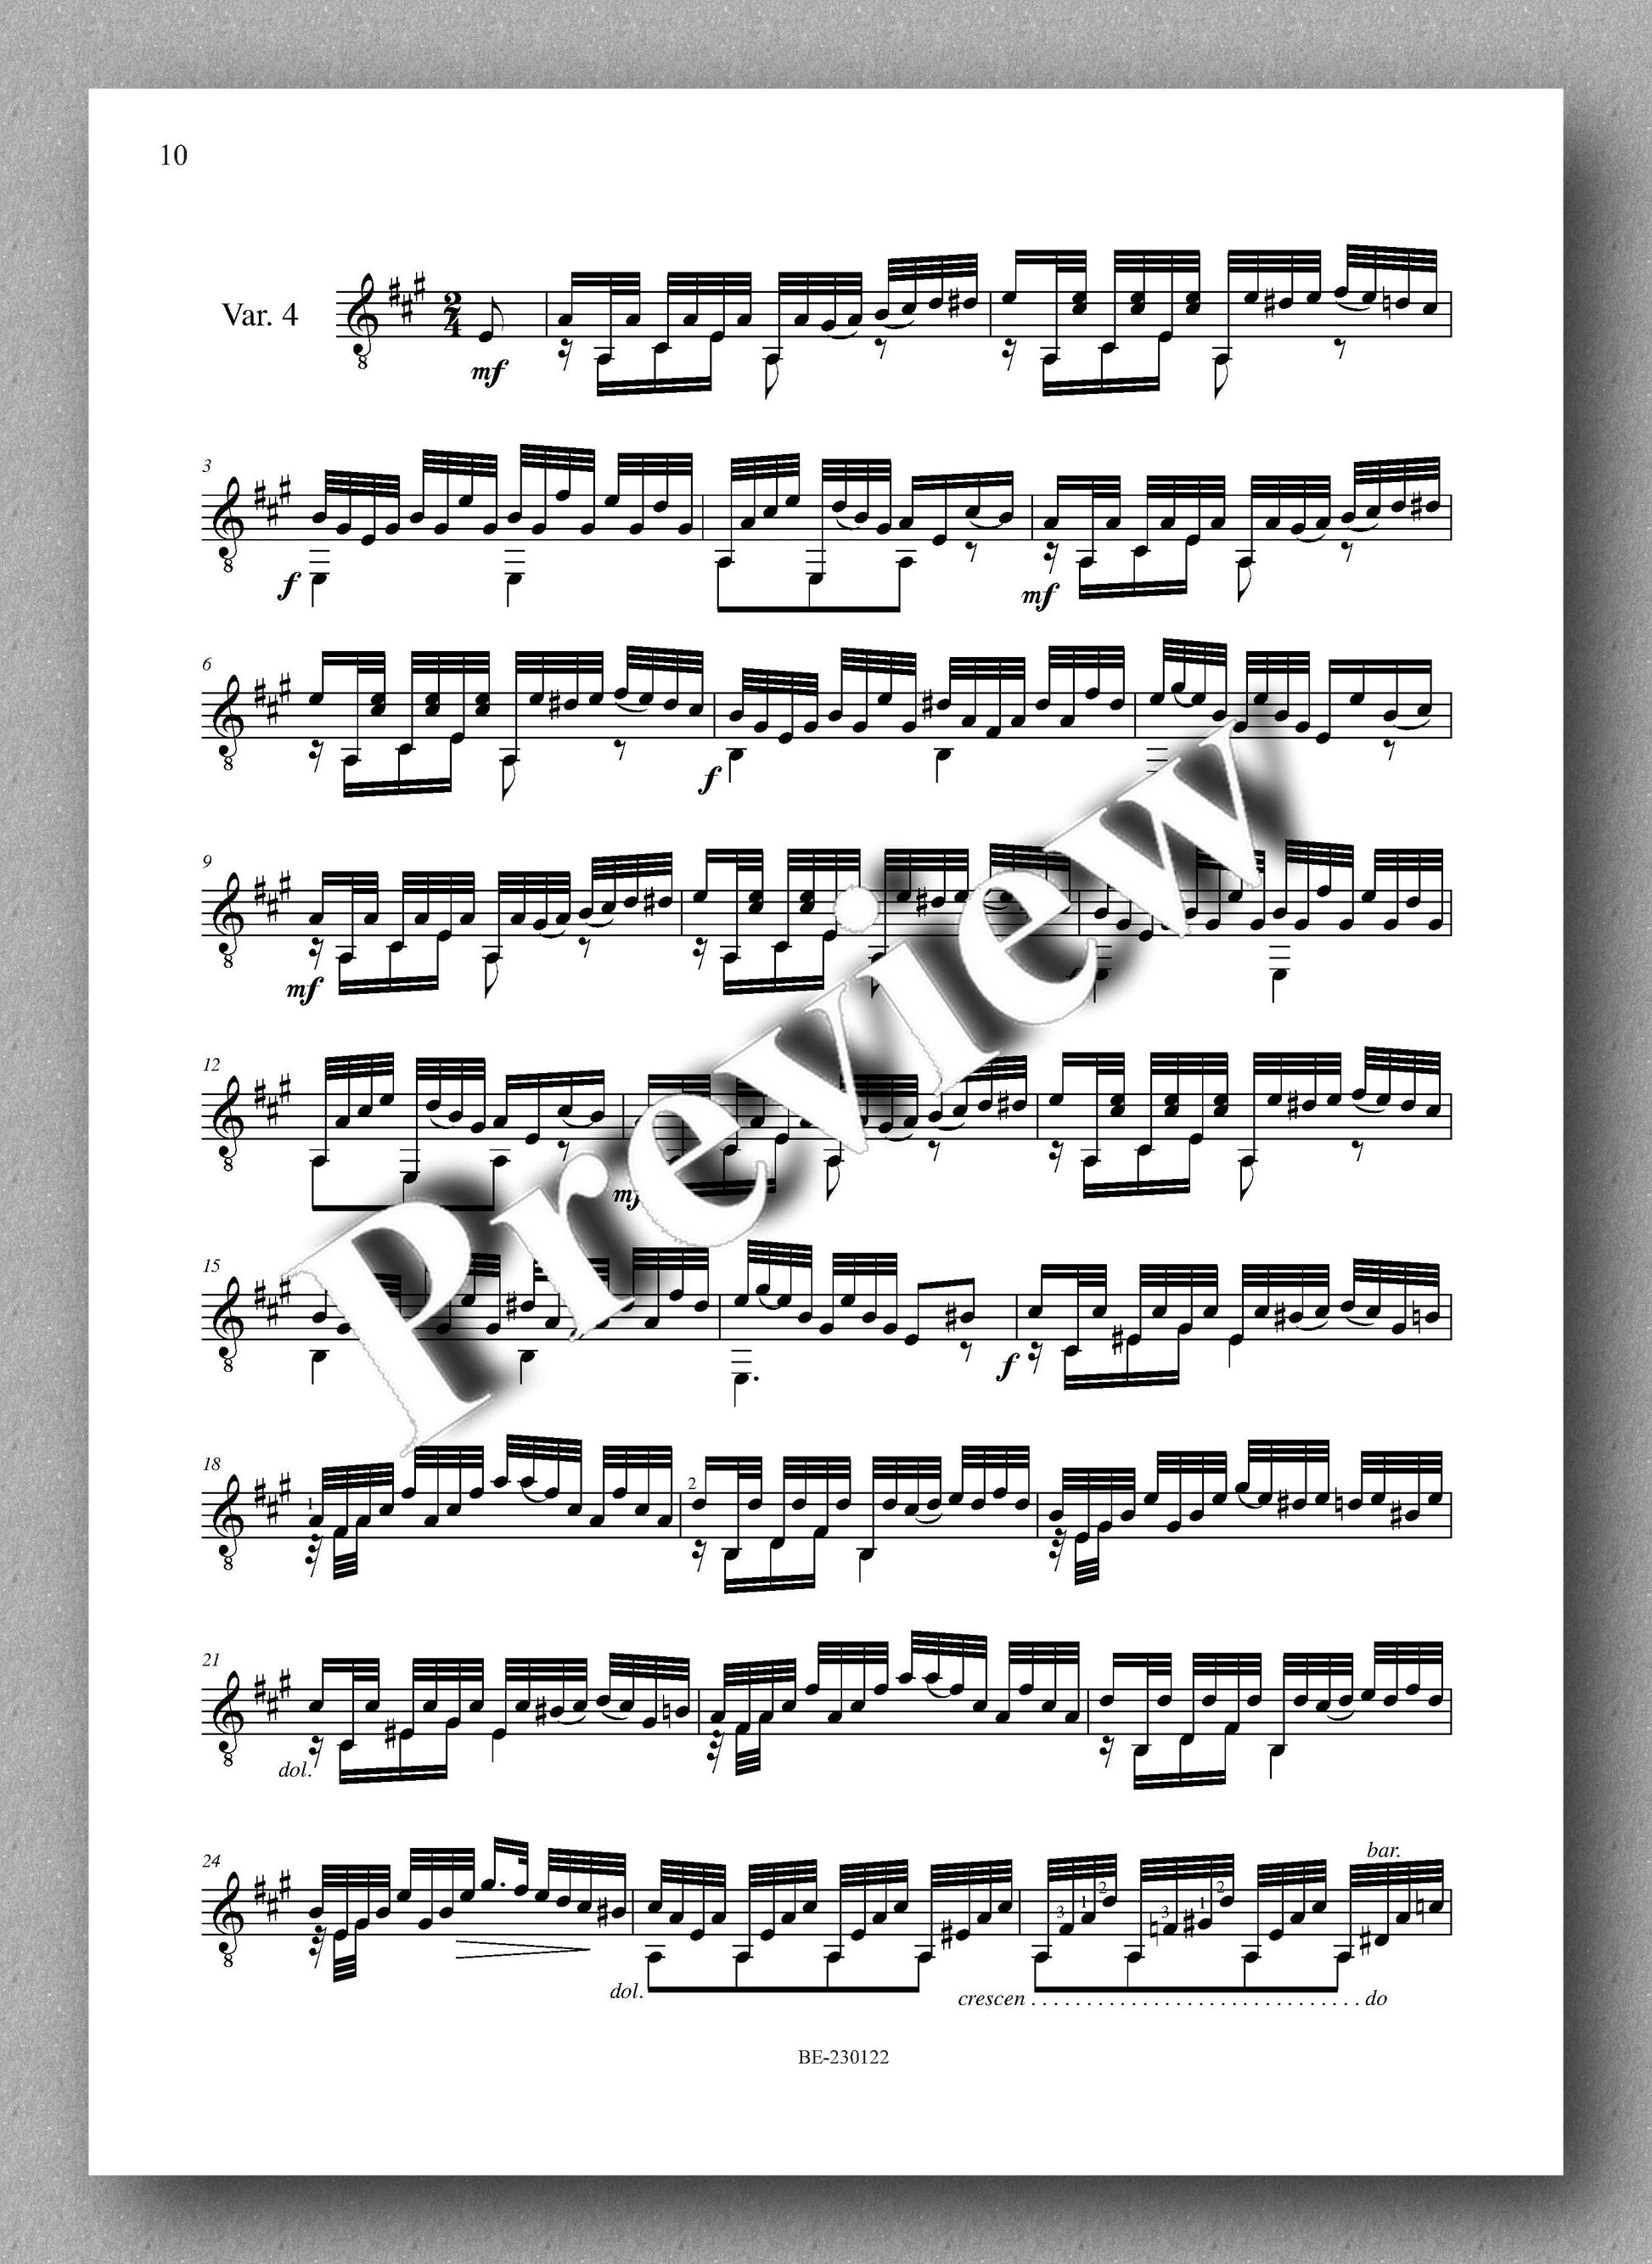 Molino, Collected Works for Guitar Solo, Vol. 34 - preview of the music score 2